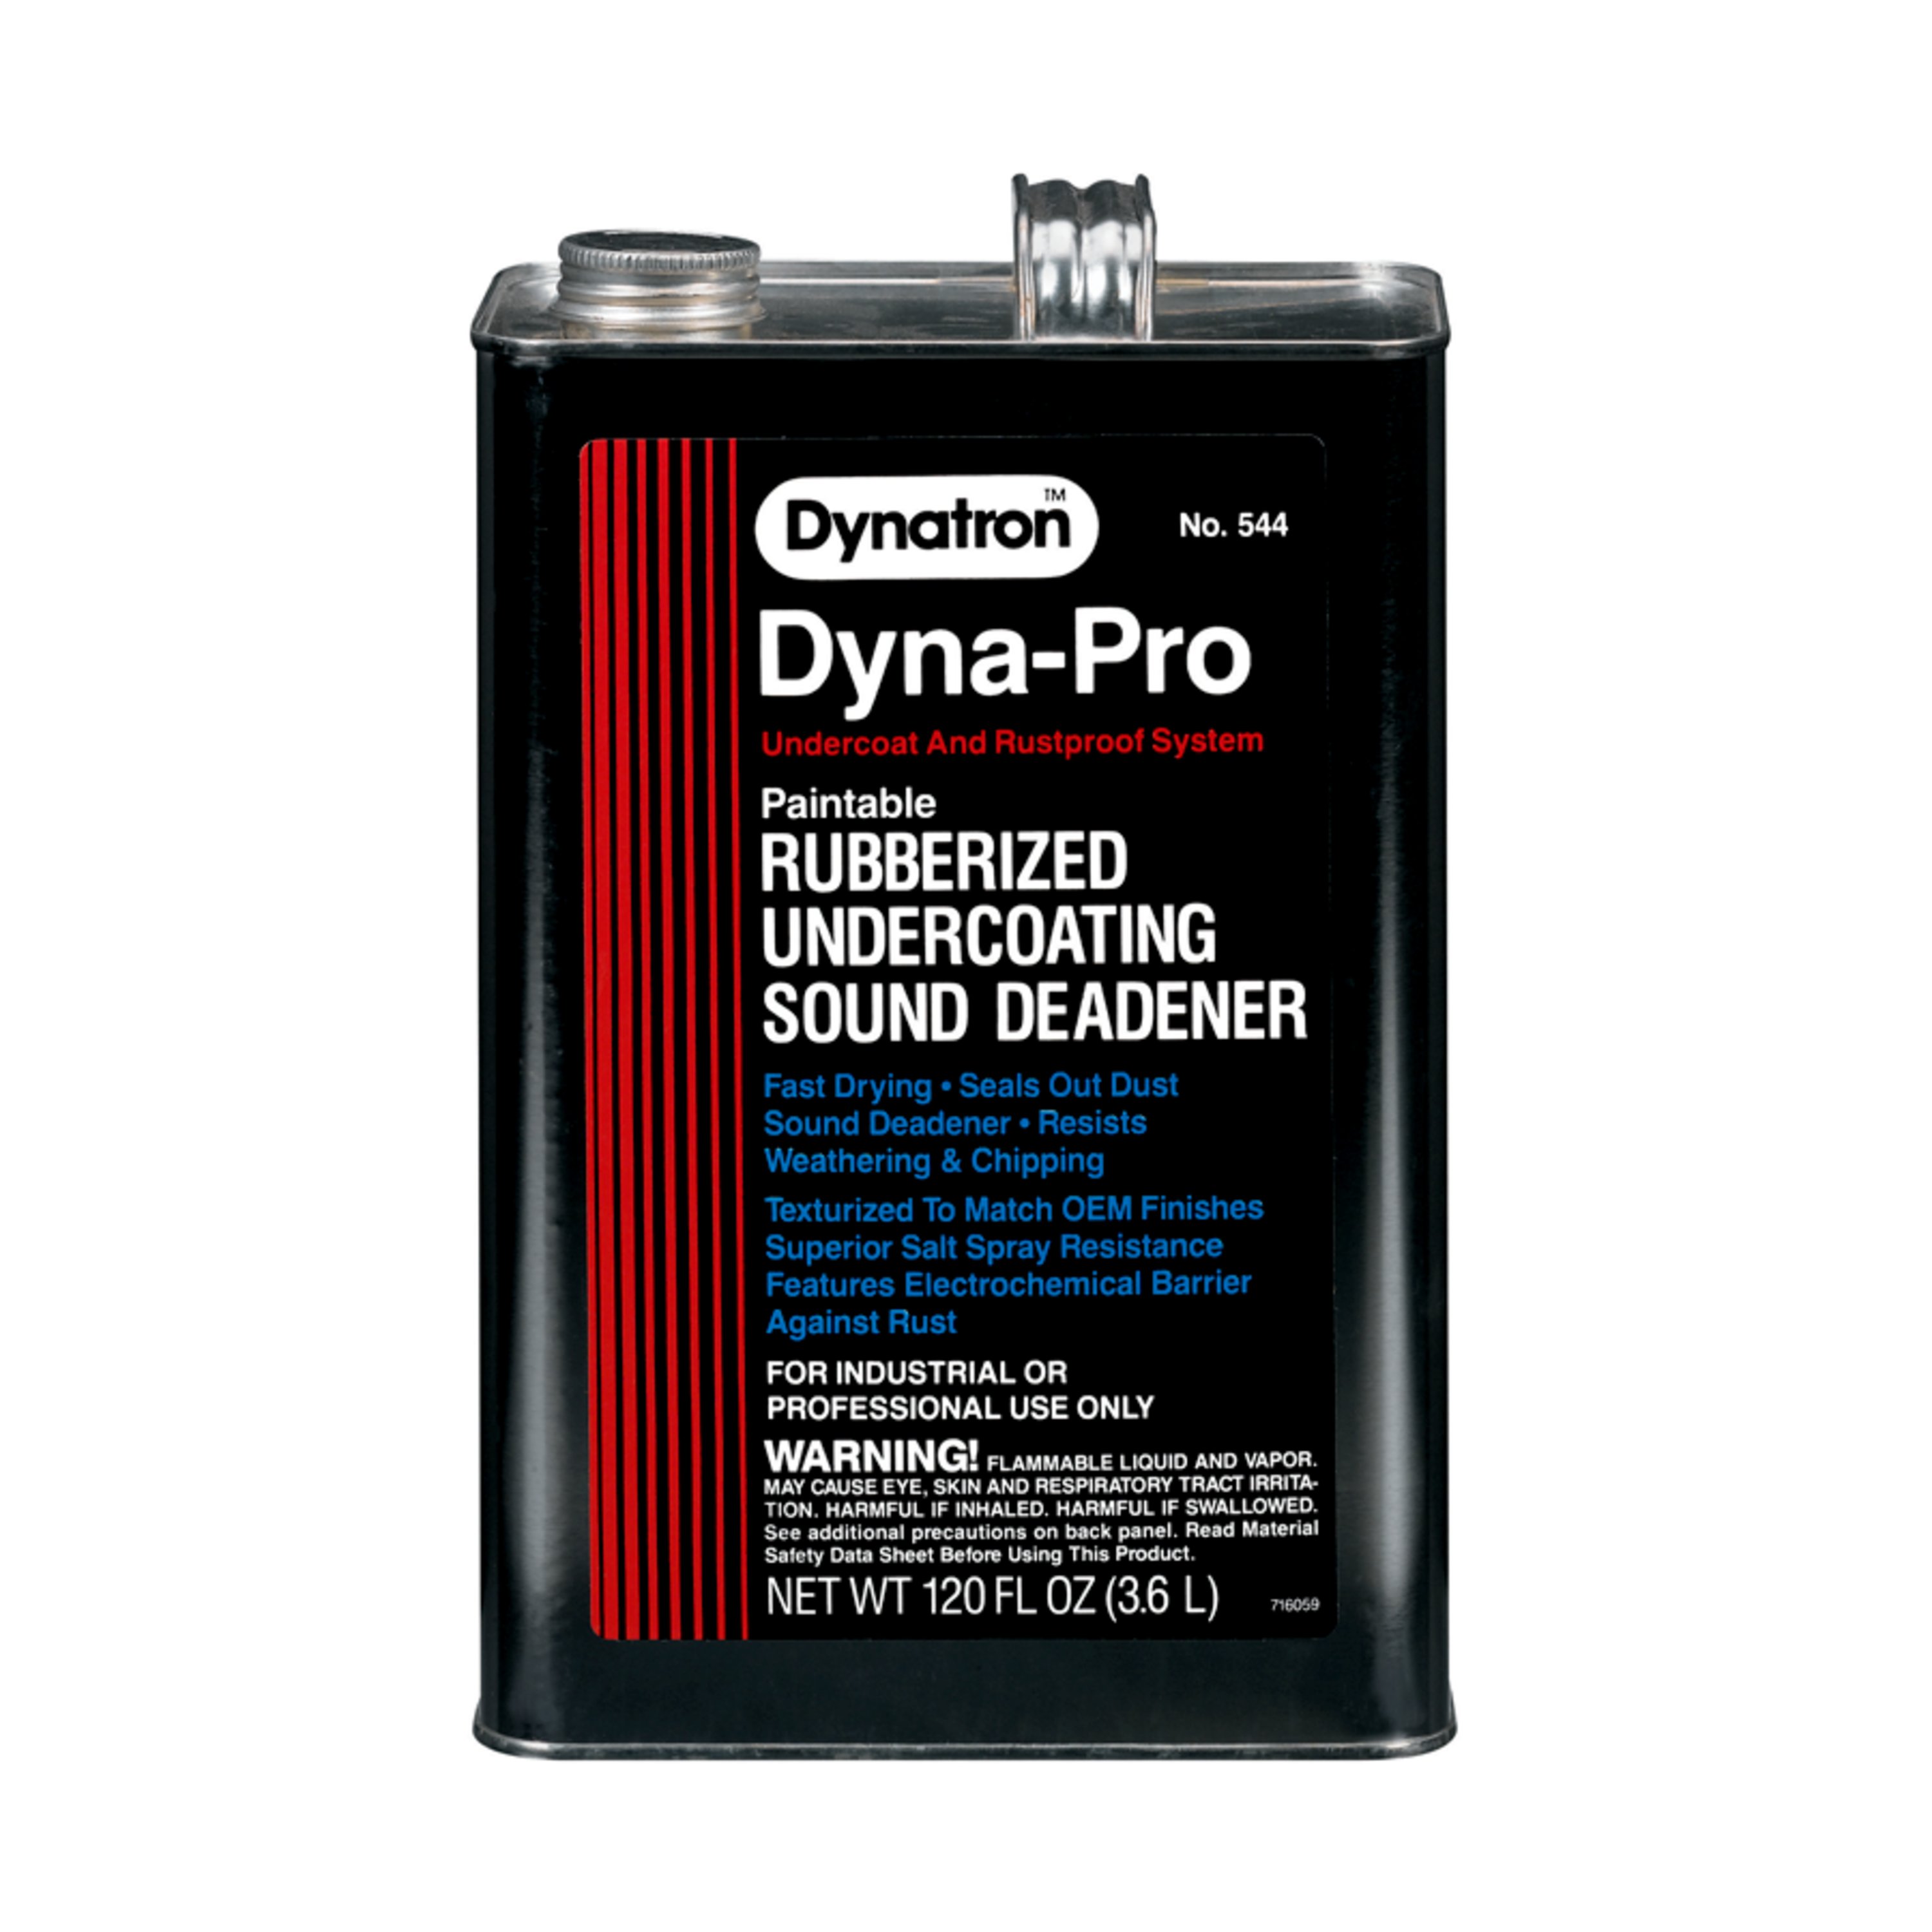 Dynatron™ Dyna-Pro® Paintable Rubberized Undercoating can be easily applied using a brush or an undercoat spray gun.